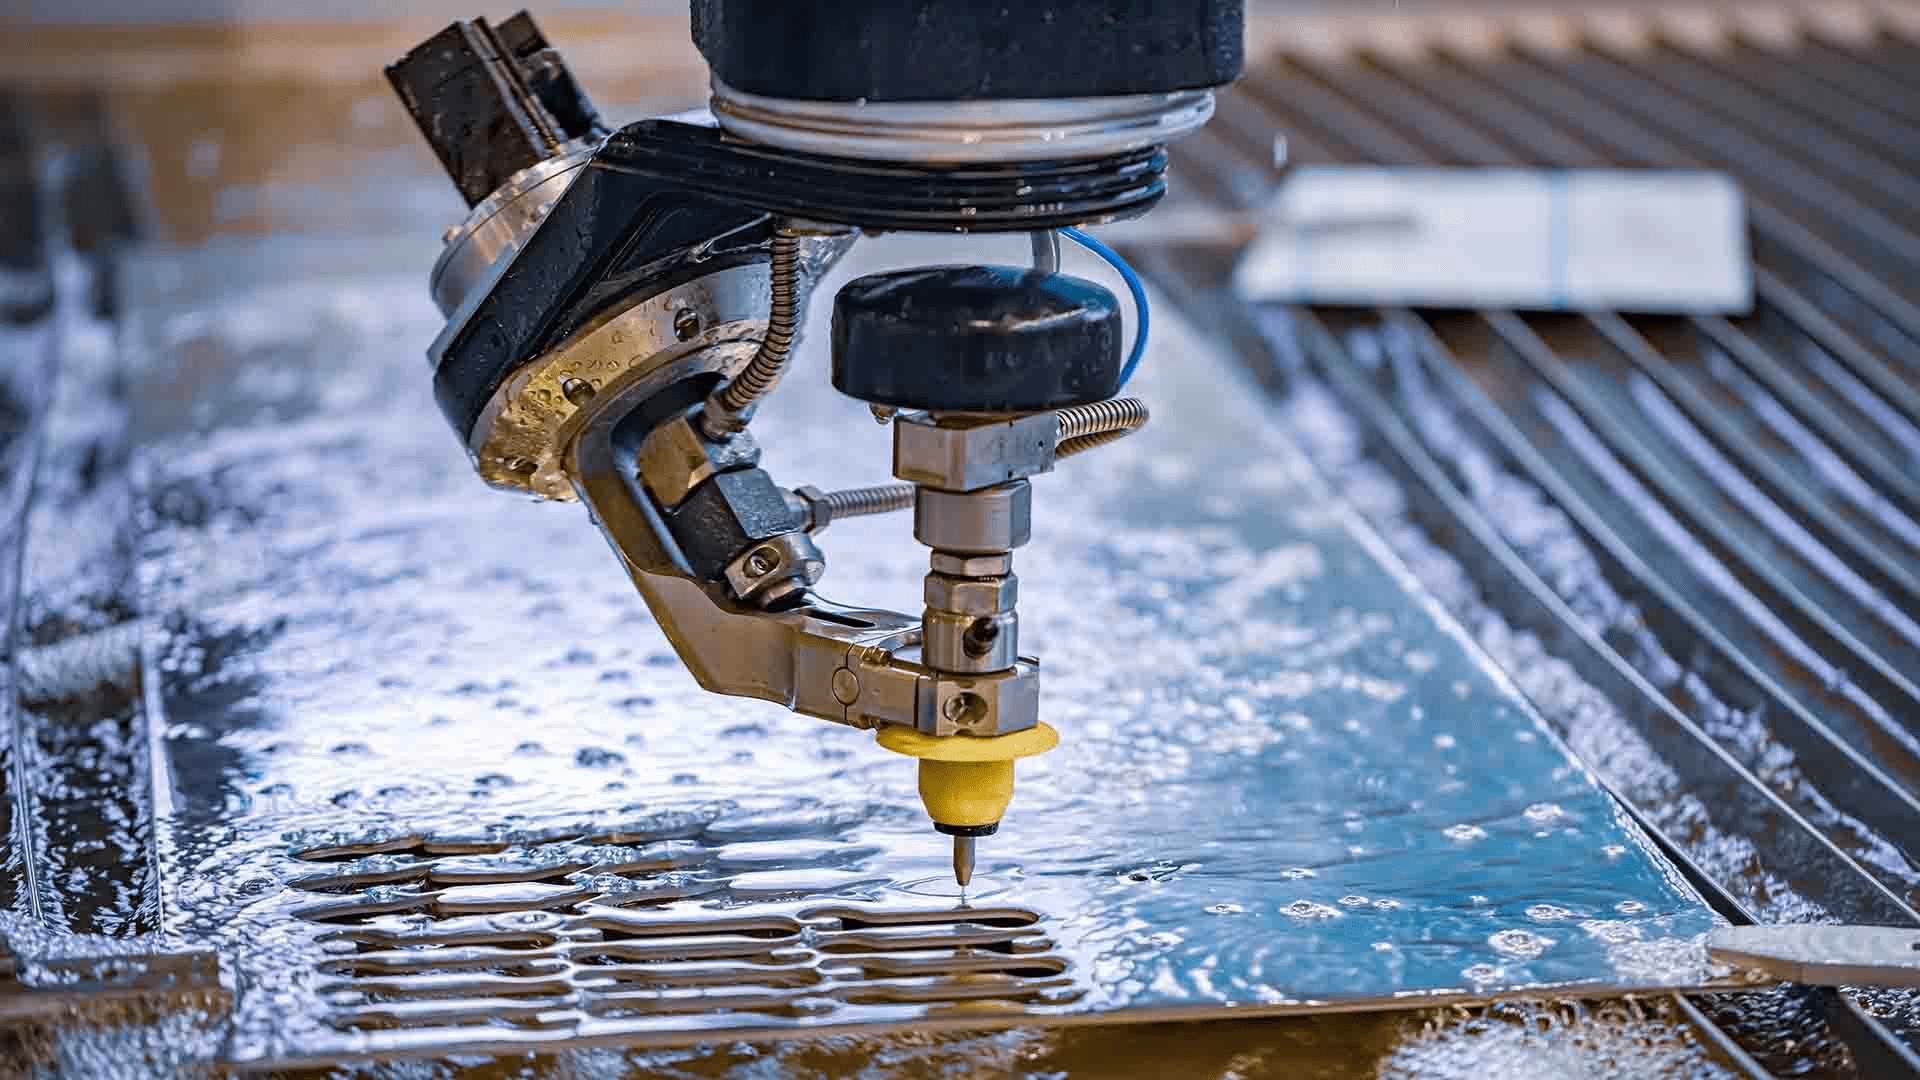 Why Do Certain Industries Prefer Waterjet Over Others?